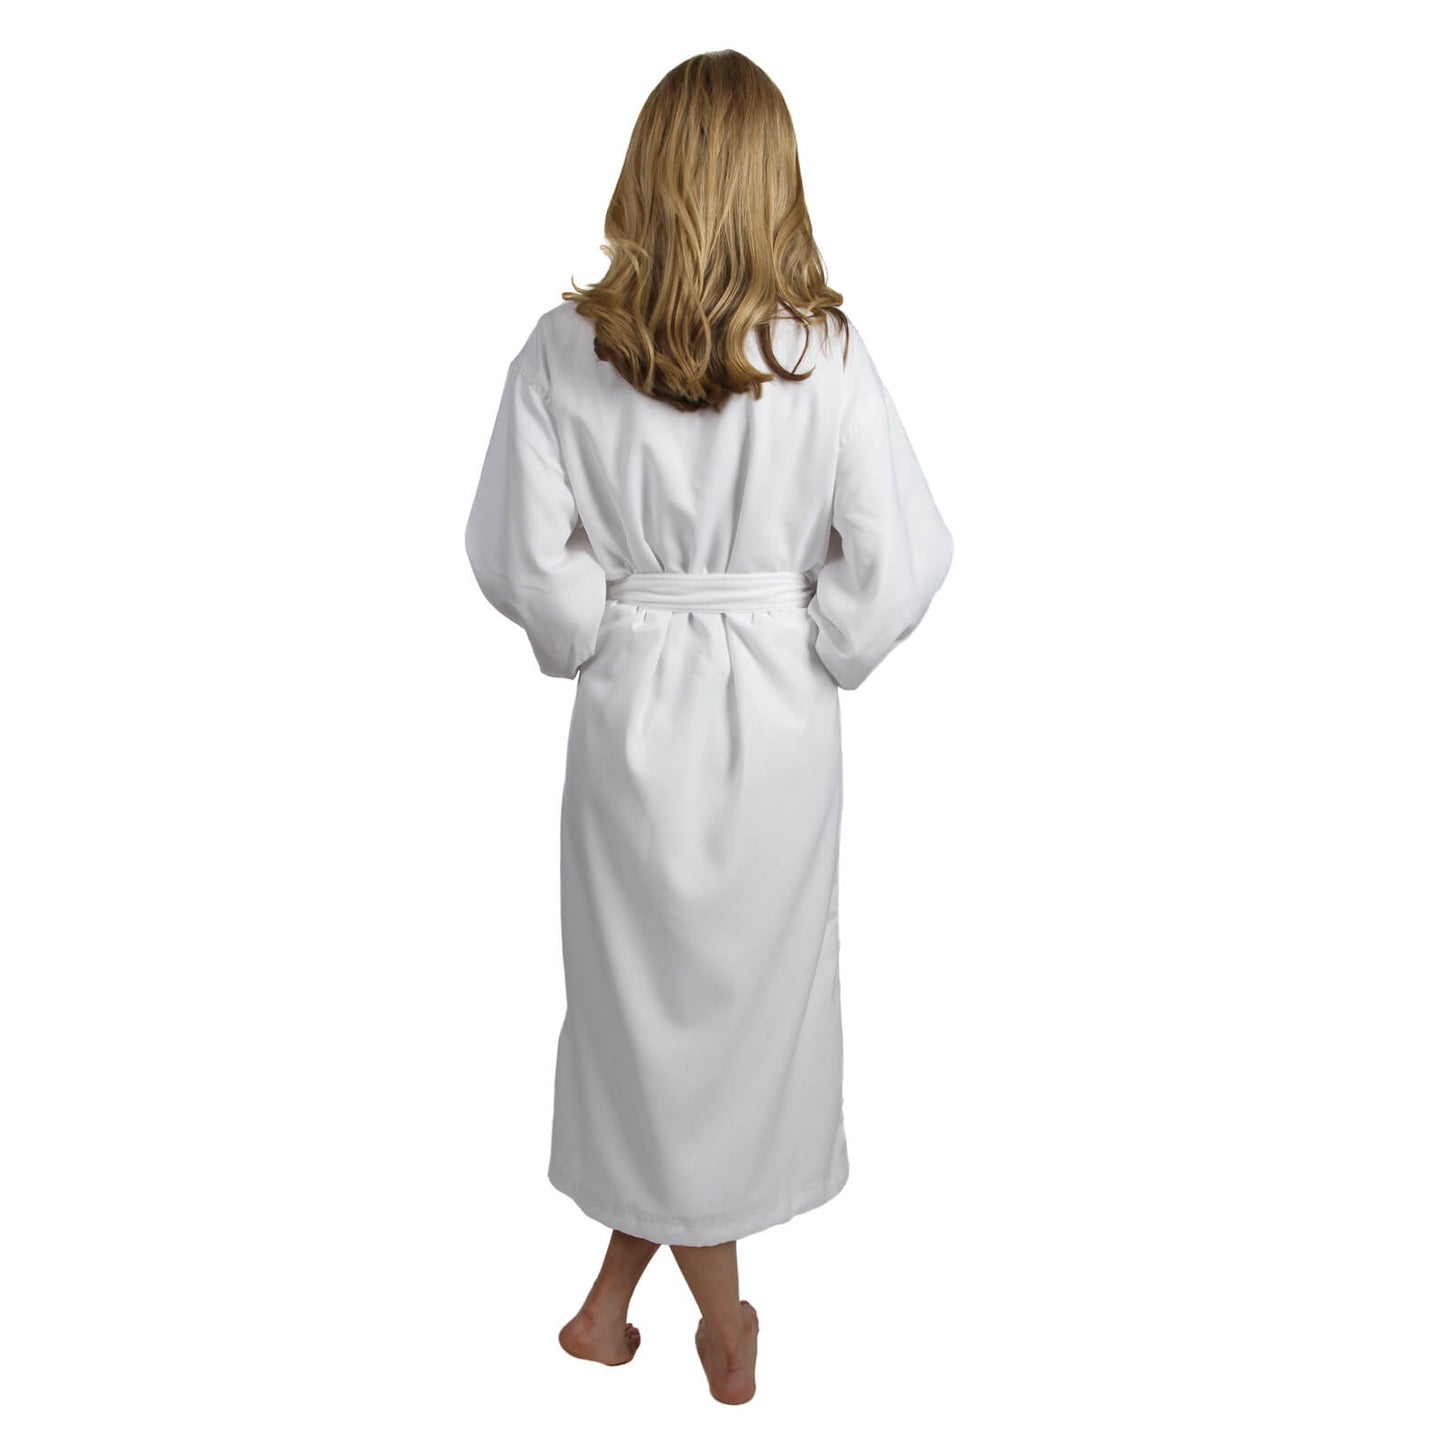 Custom Robes For Wedding - Bridal Party